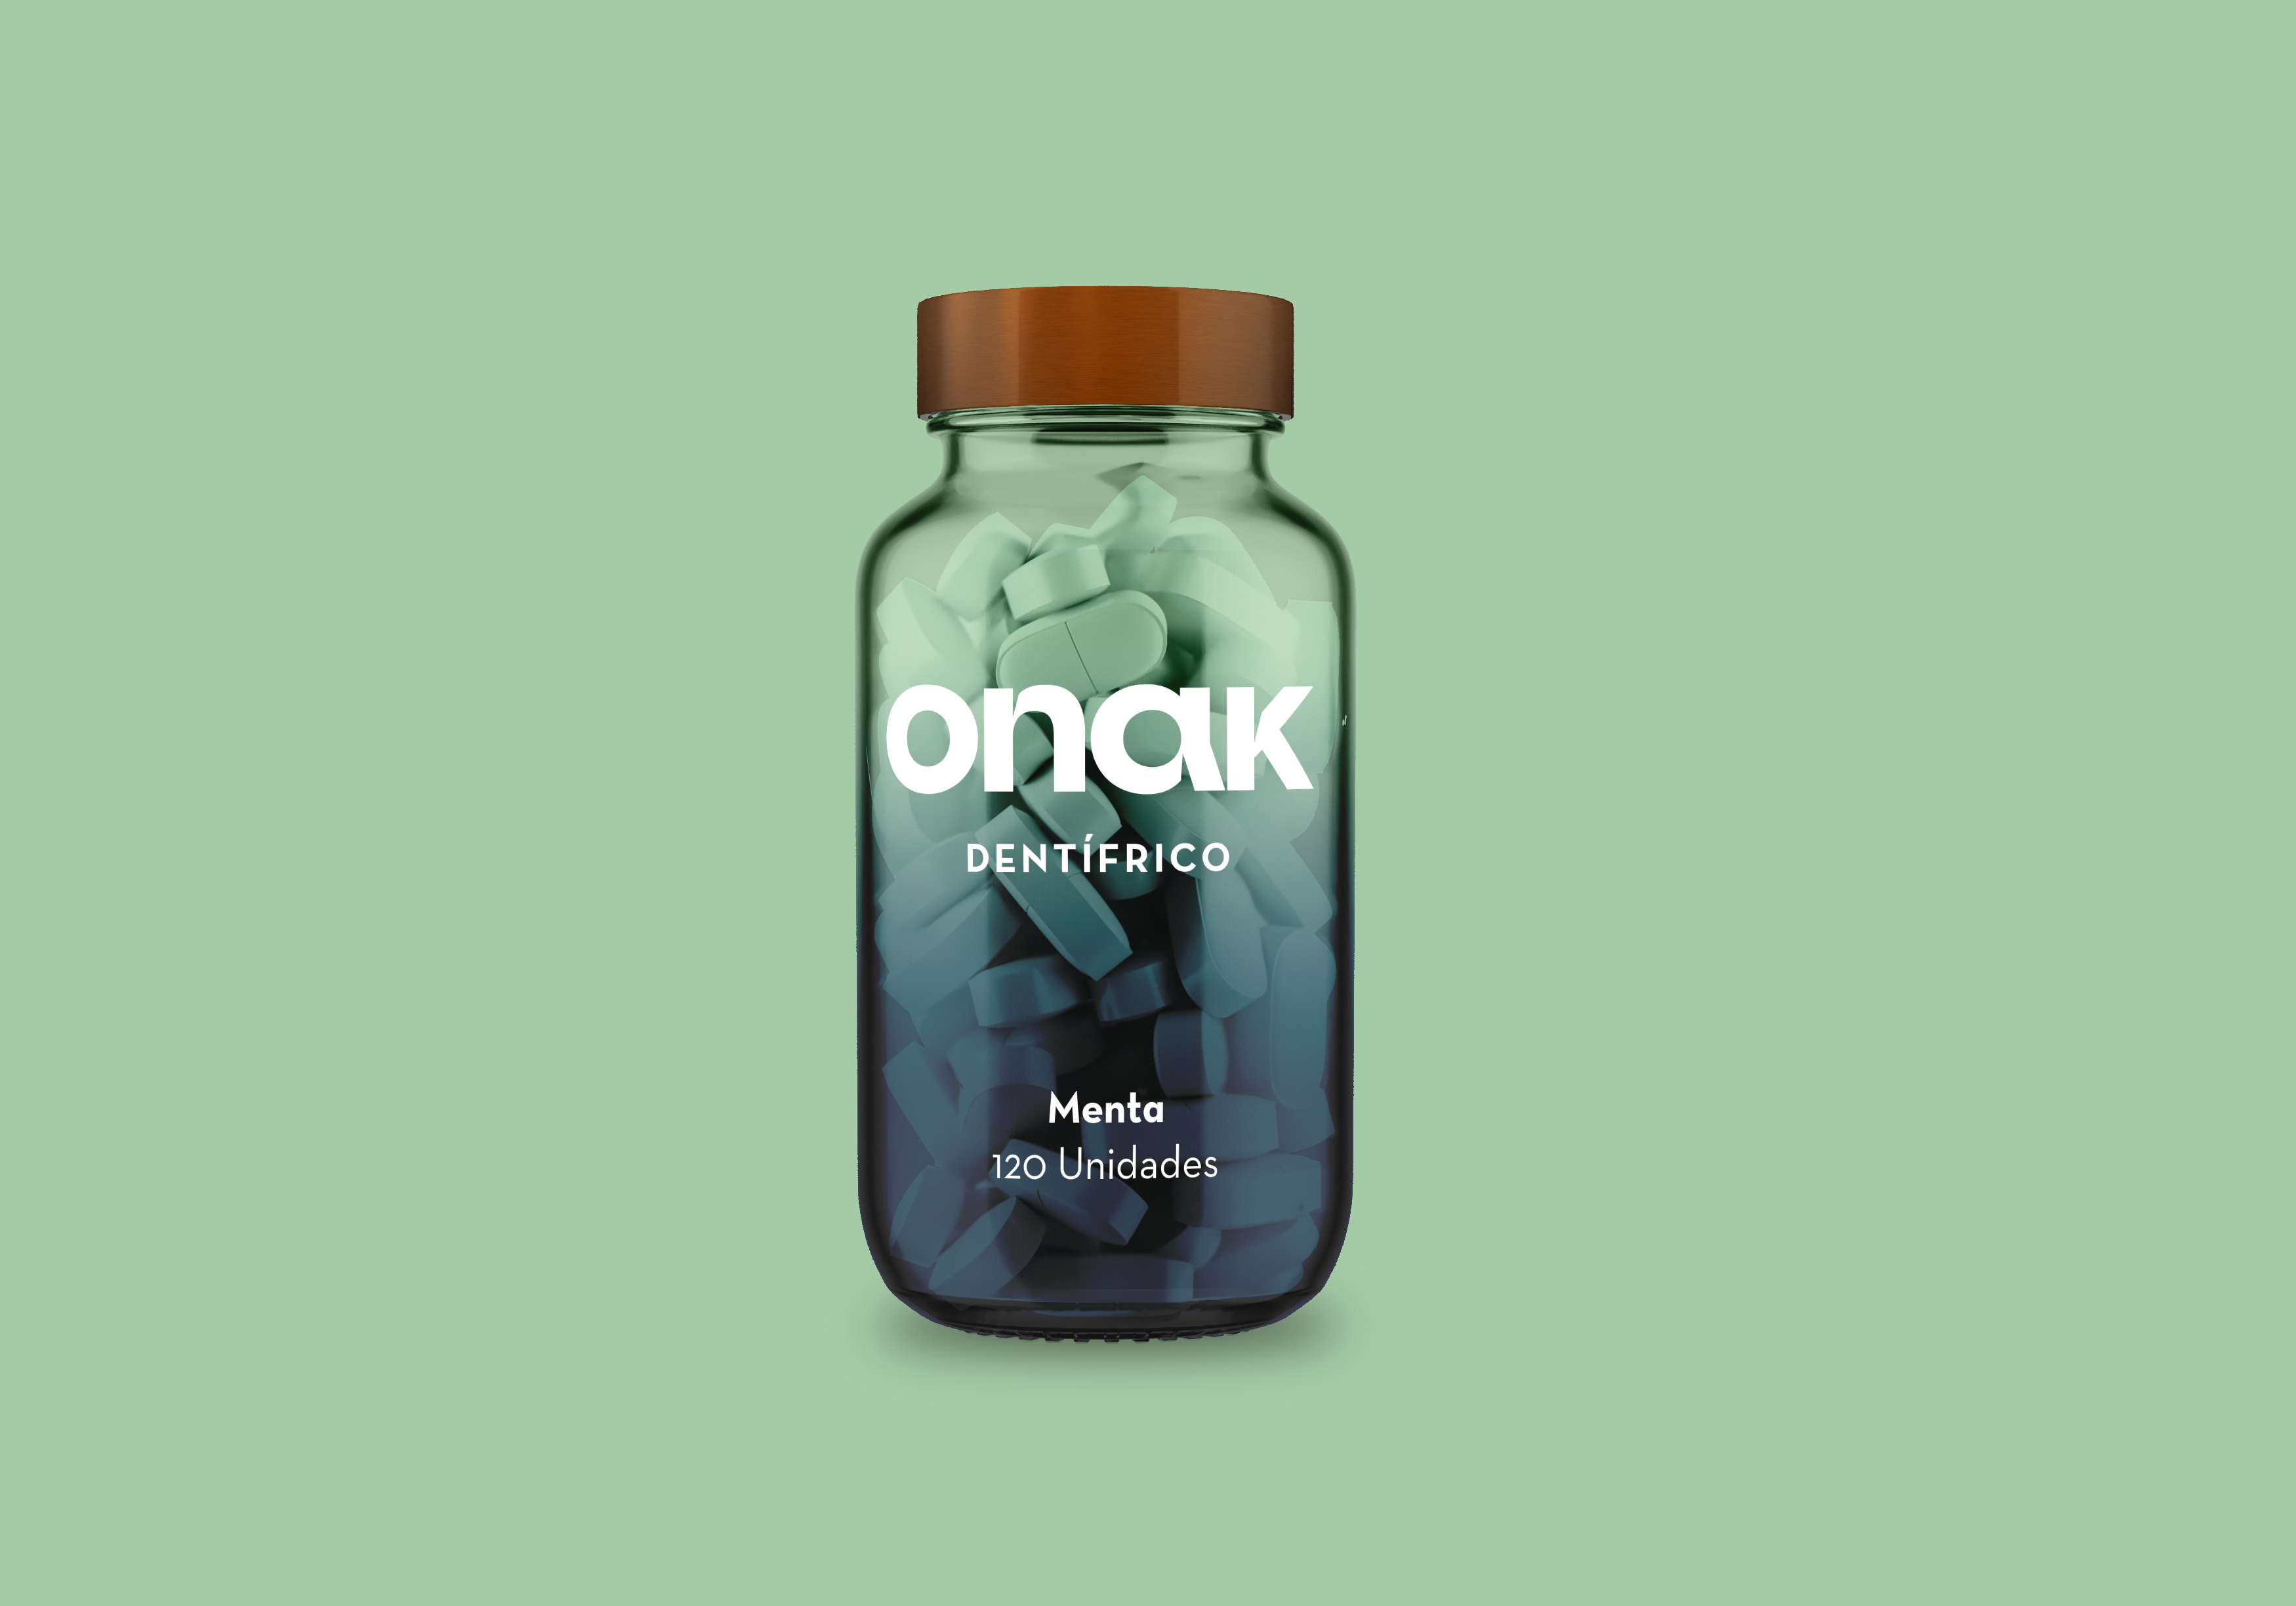 Onak, salud bucal by ideolab - Creative Work